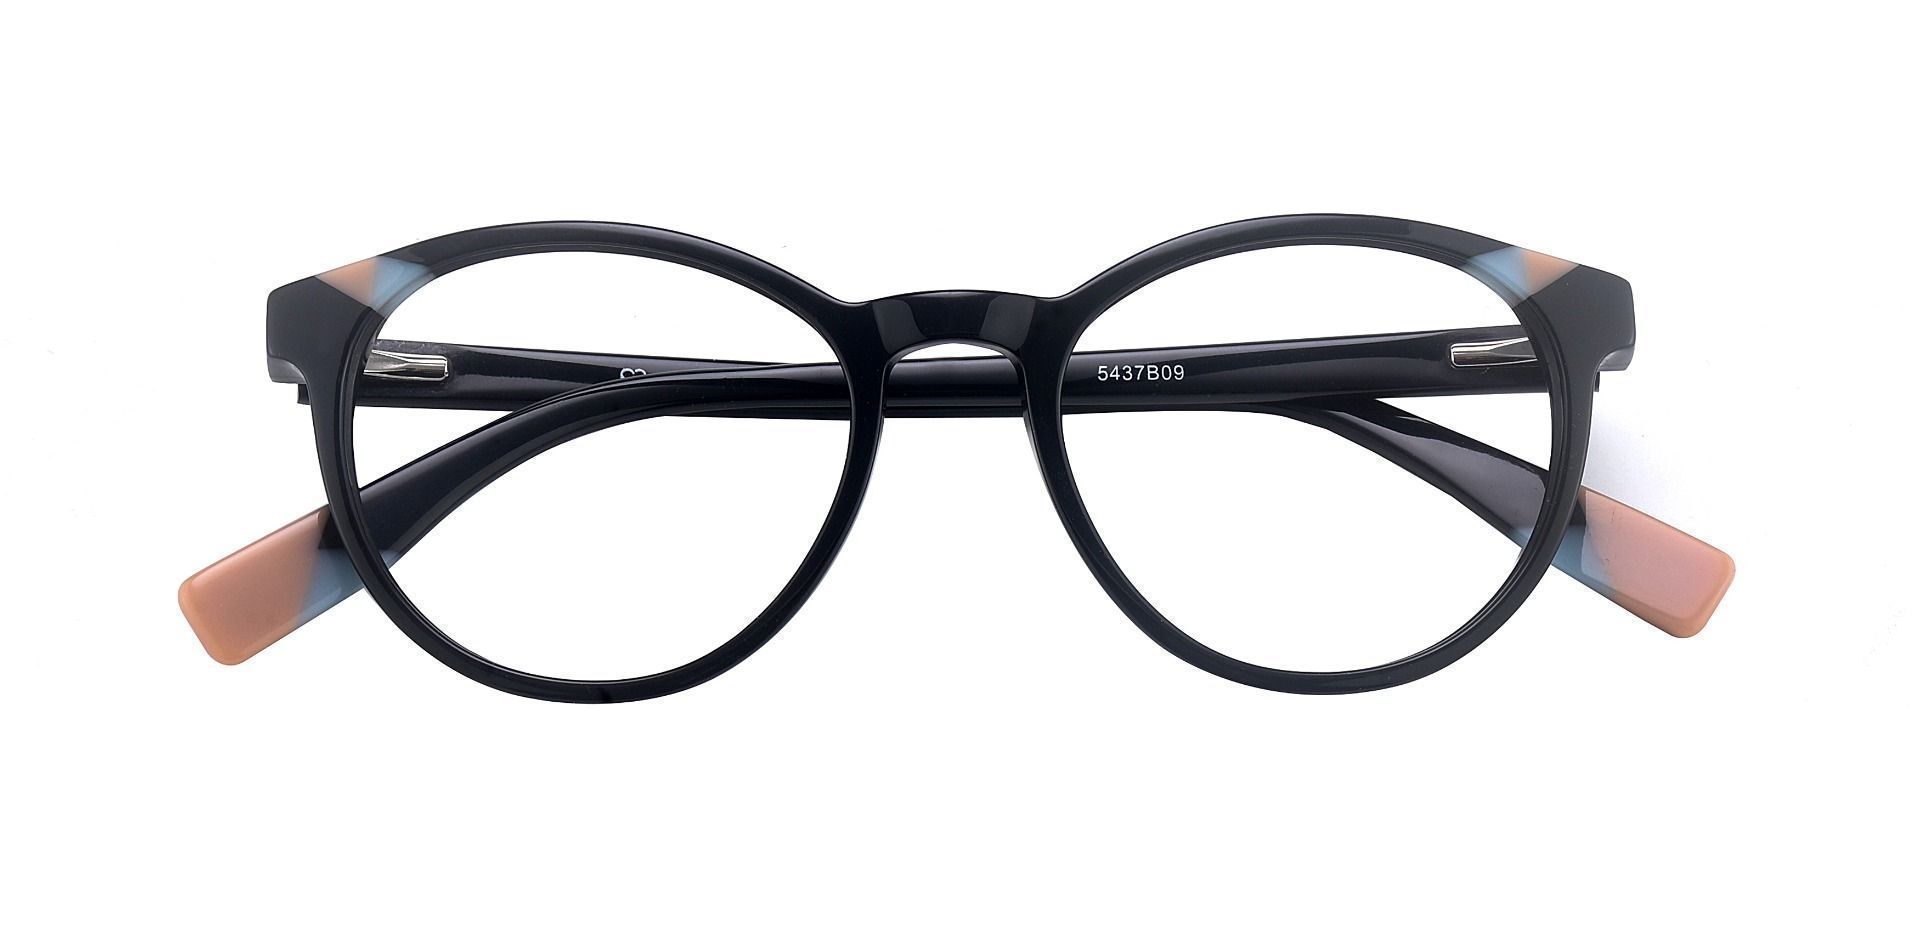 Odette Oval Non-Rx Glasses - The Frame Is Black And Brown